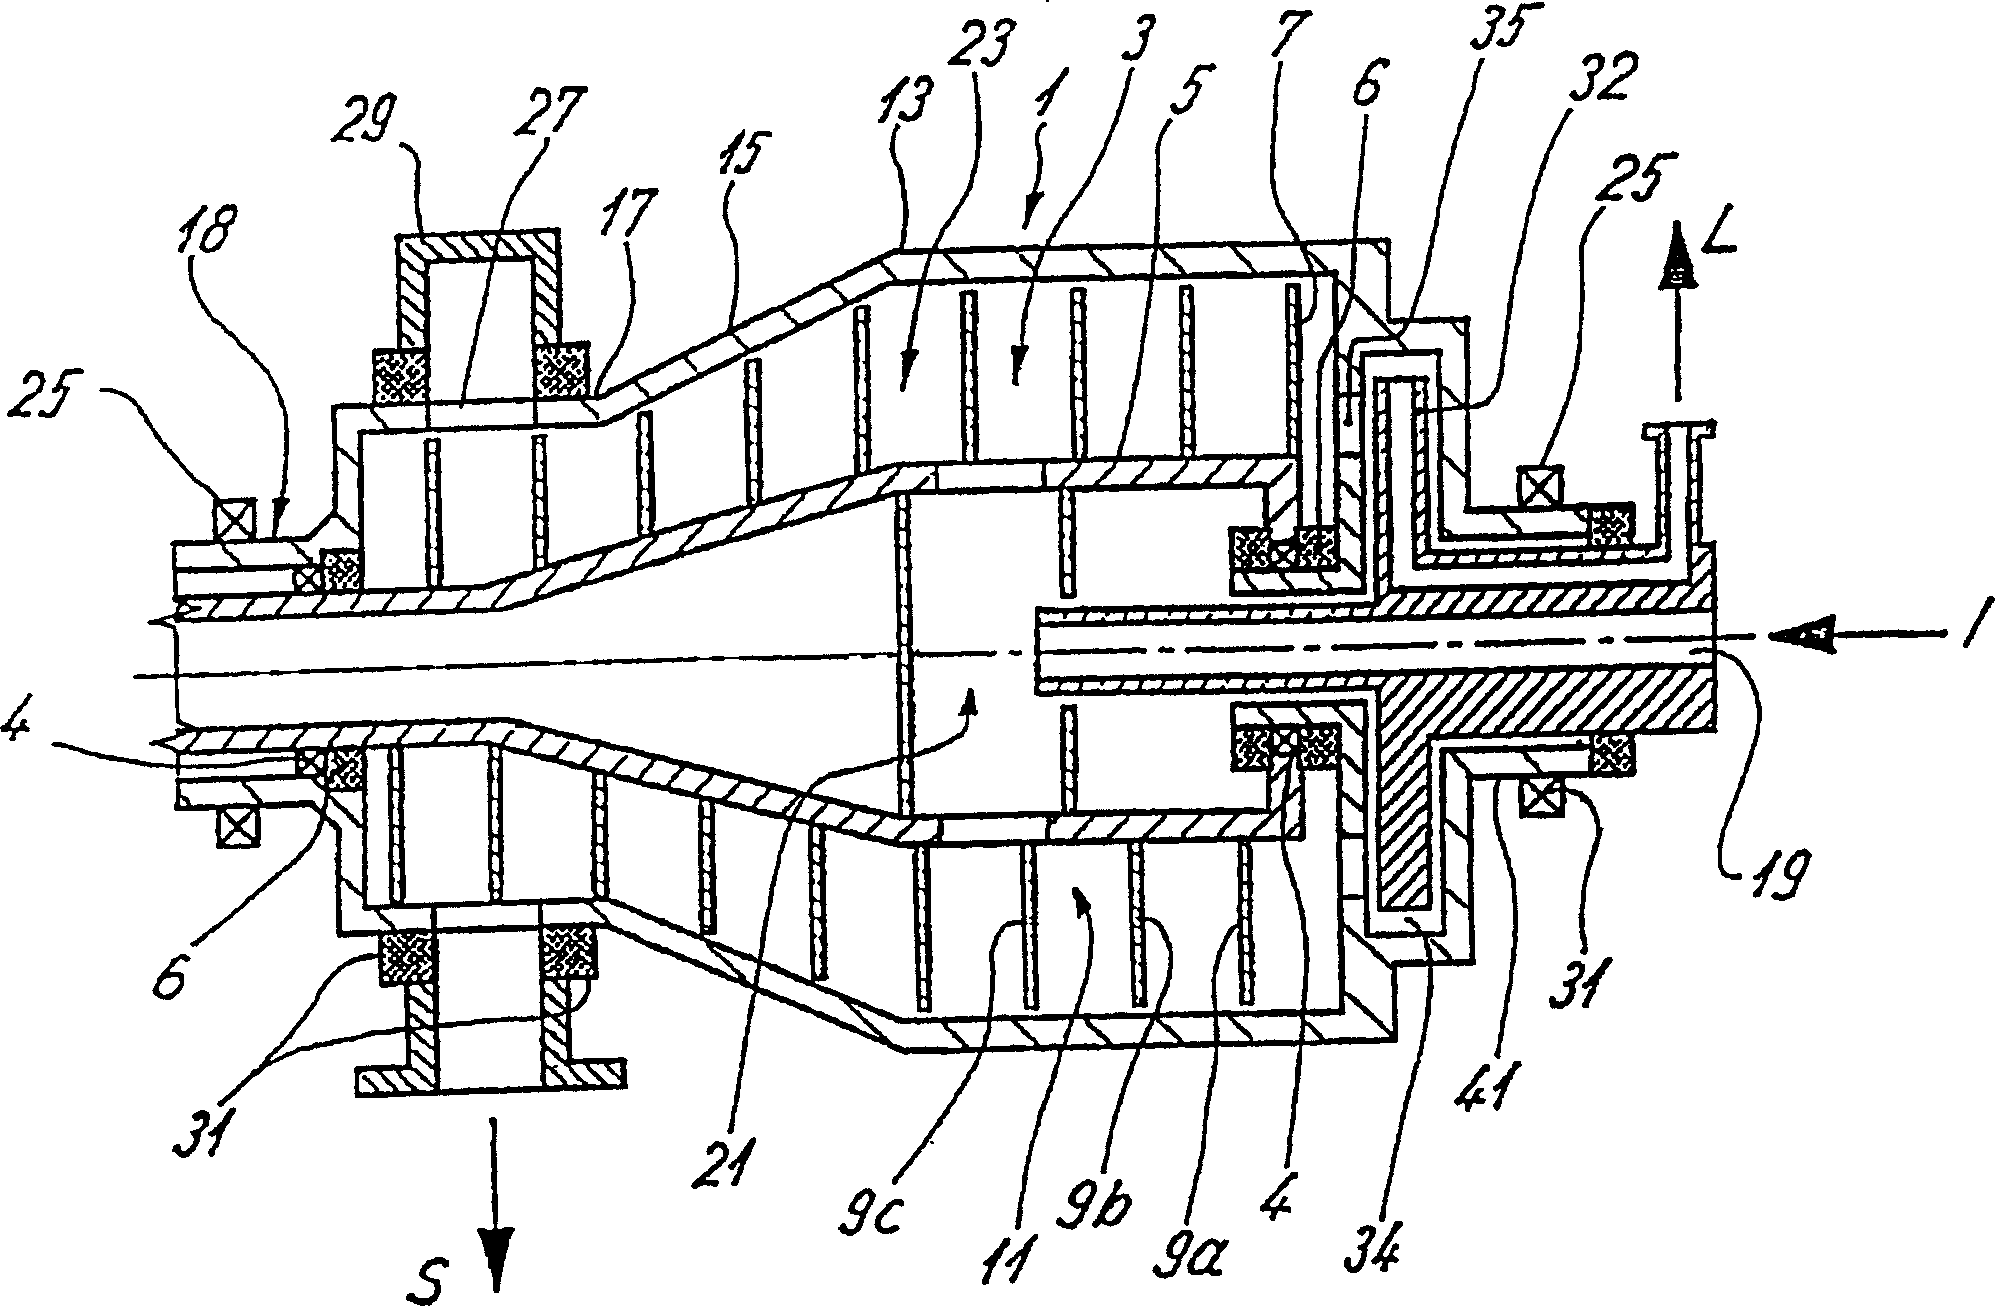 Solid bowl helical conveyor centrifuge with a pressurized housing